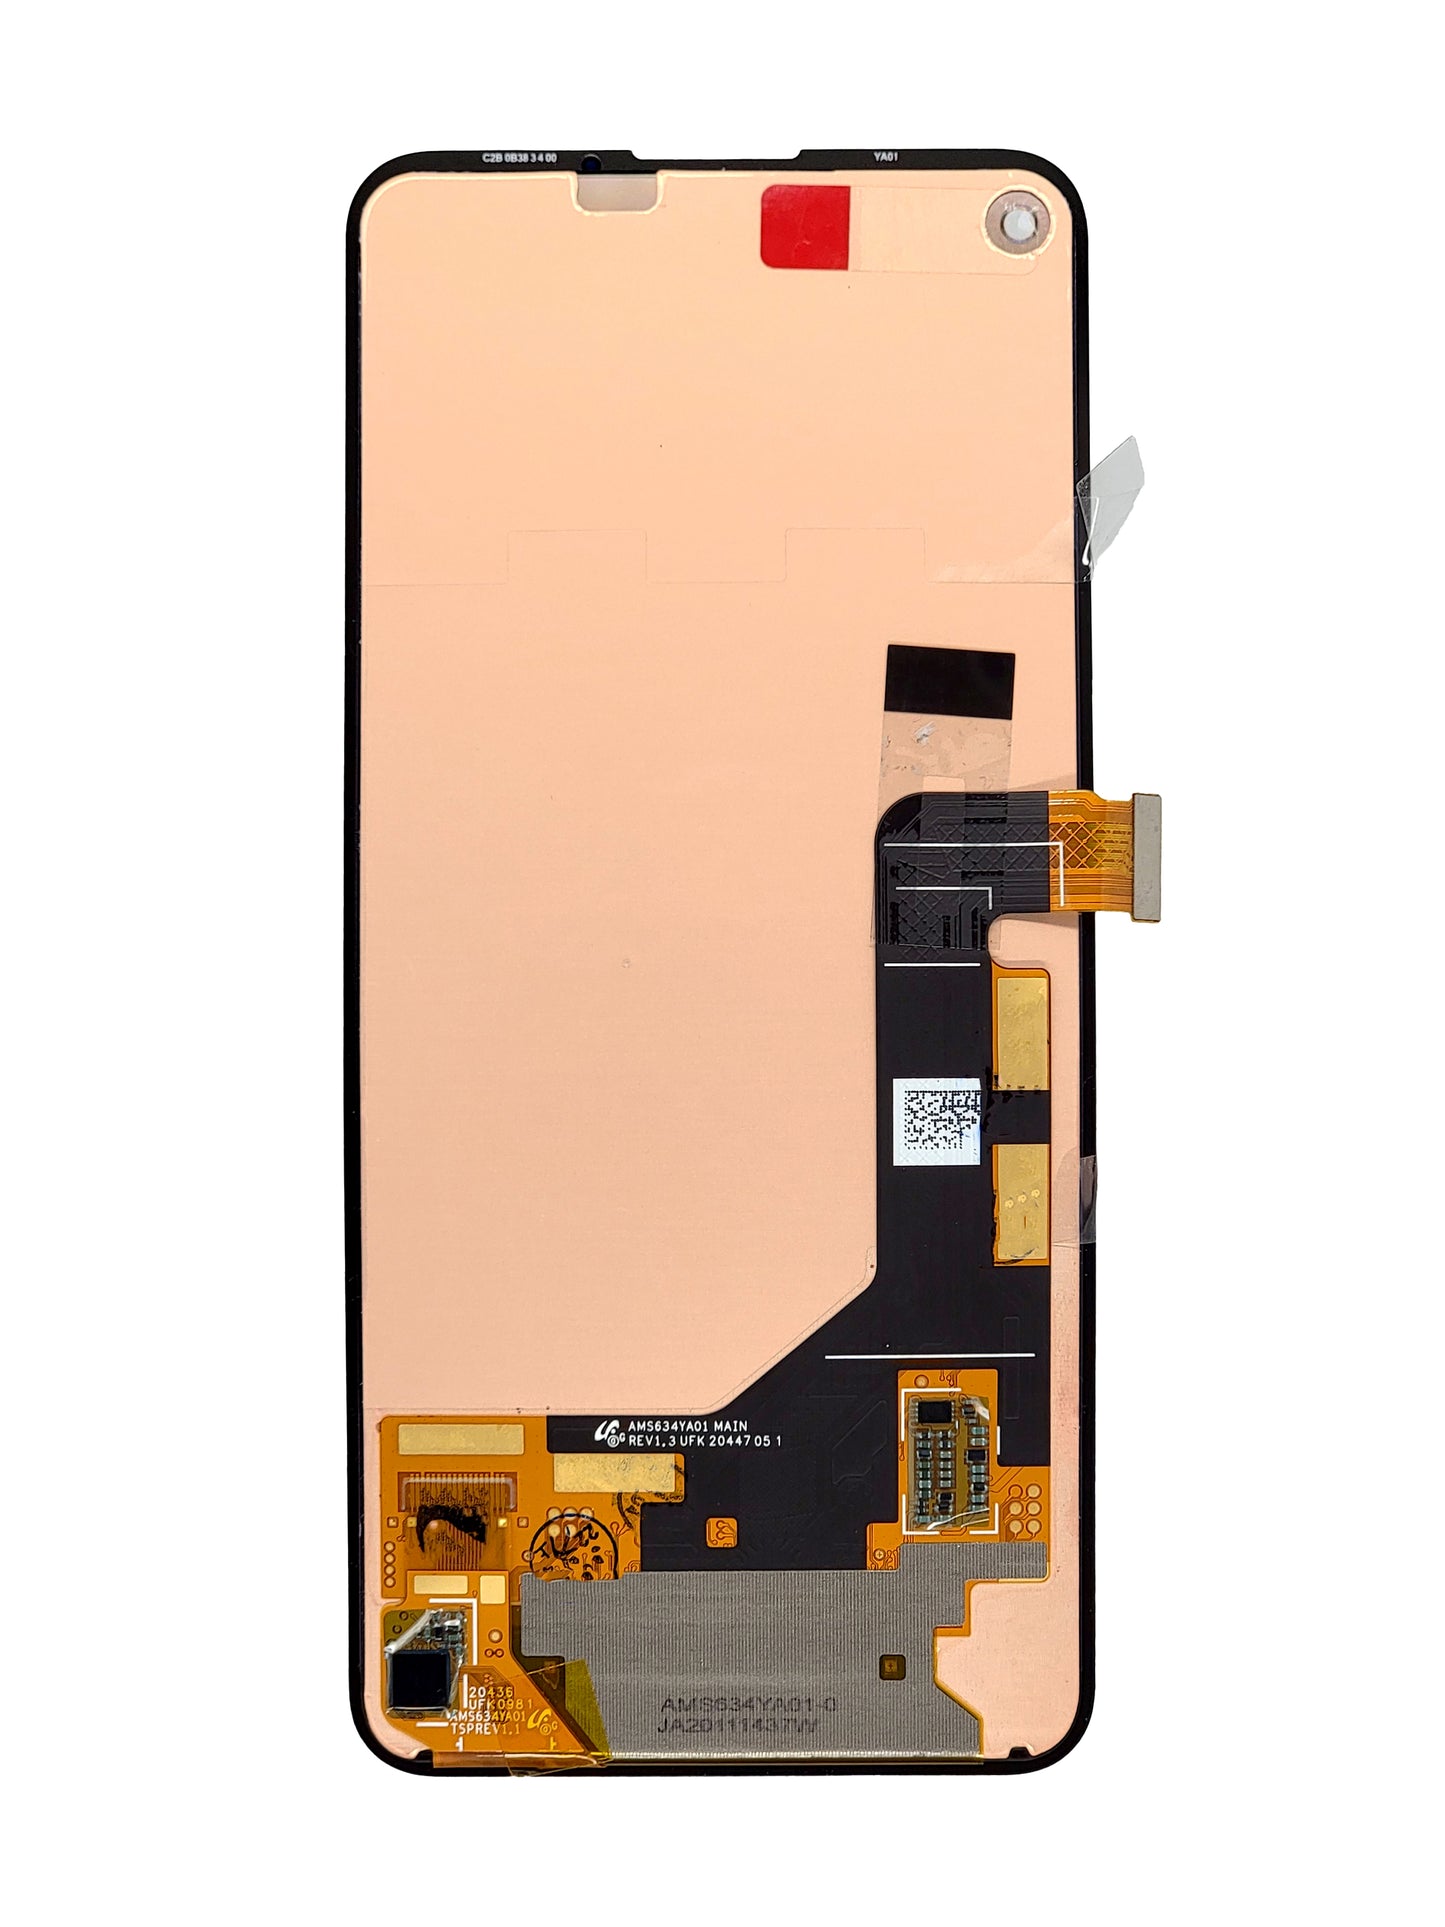 GOP Pixel 3XL Screen Assembly (Without The Frame) (Refurbished) (Black)